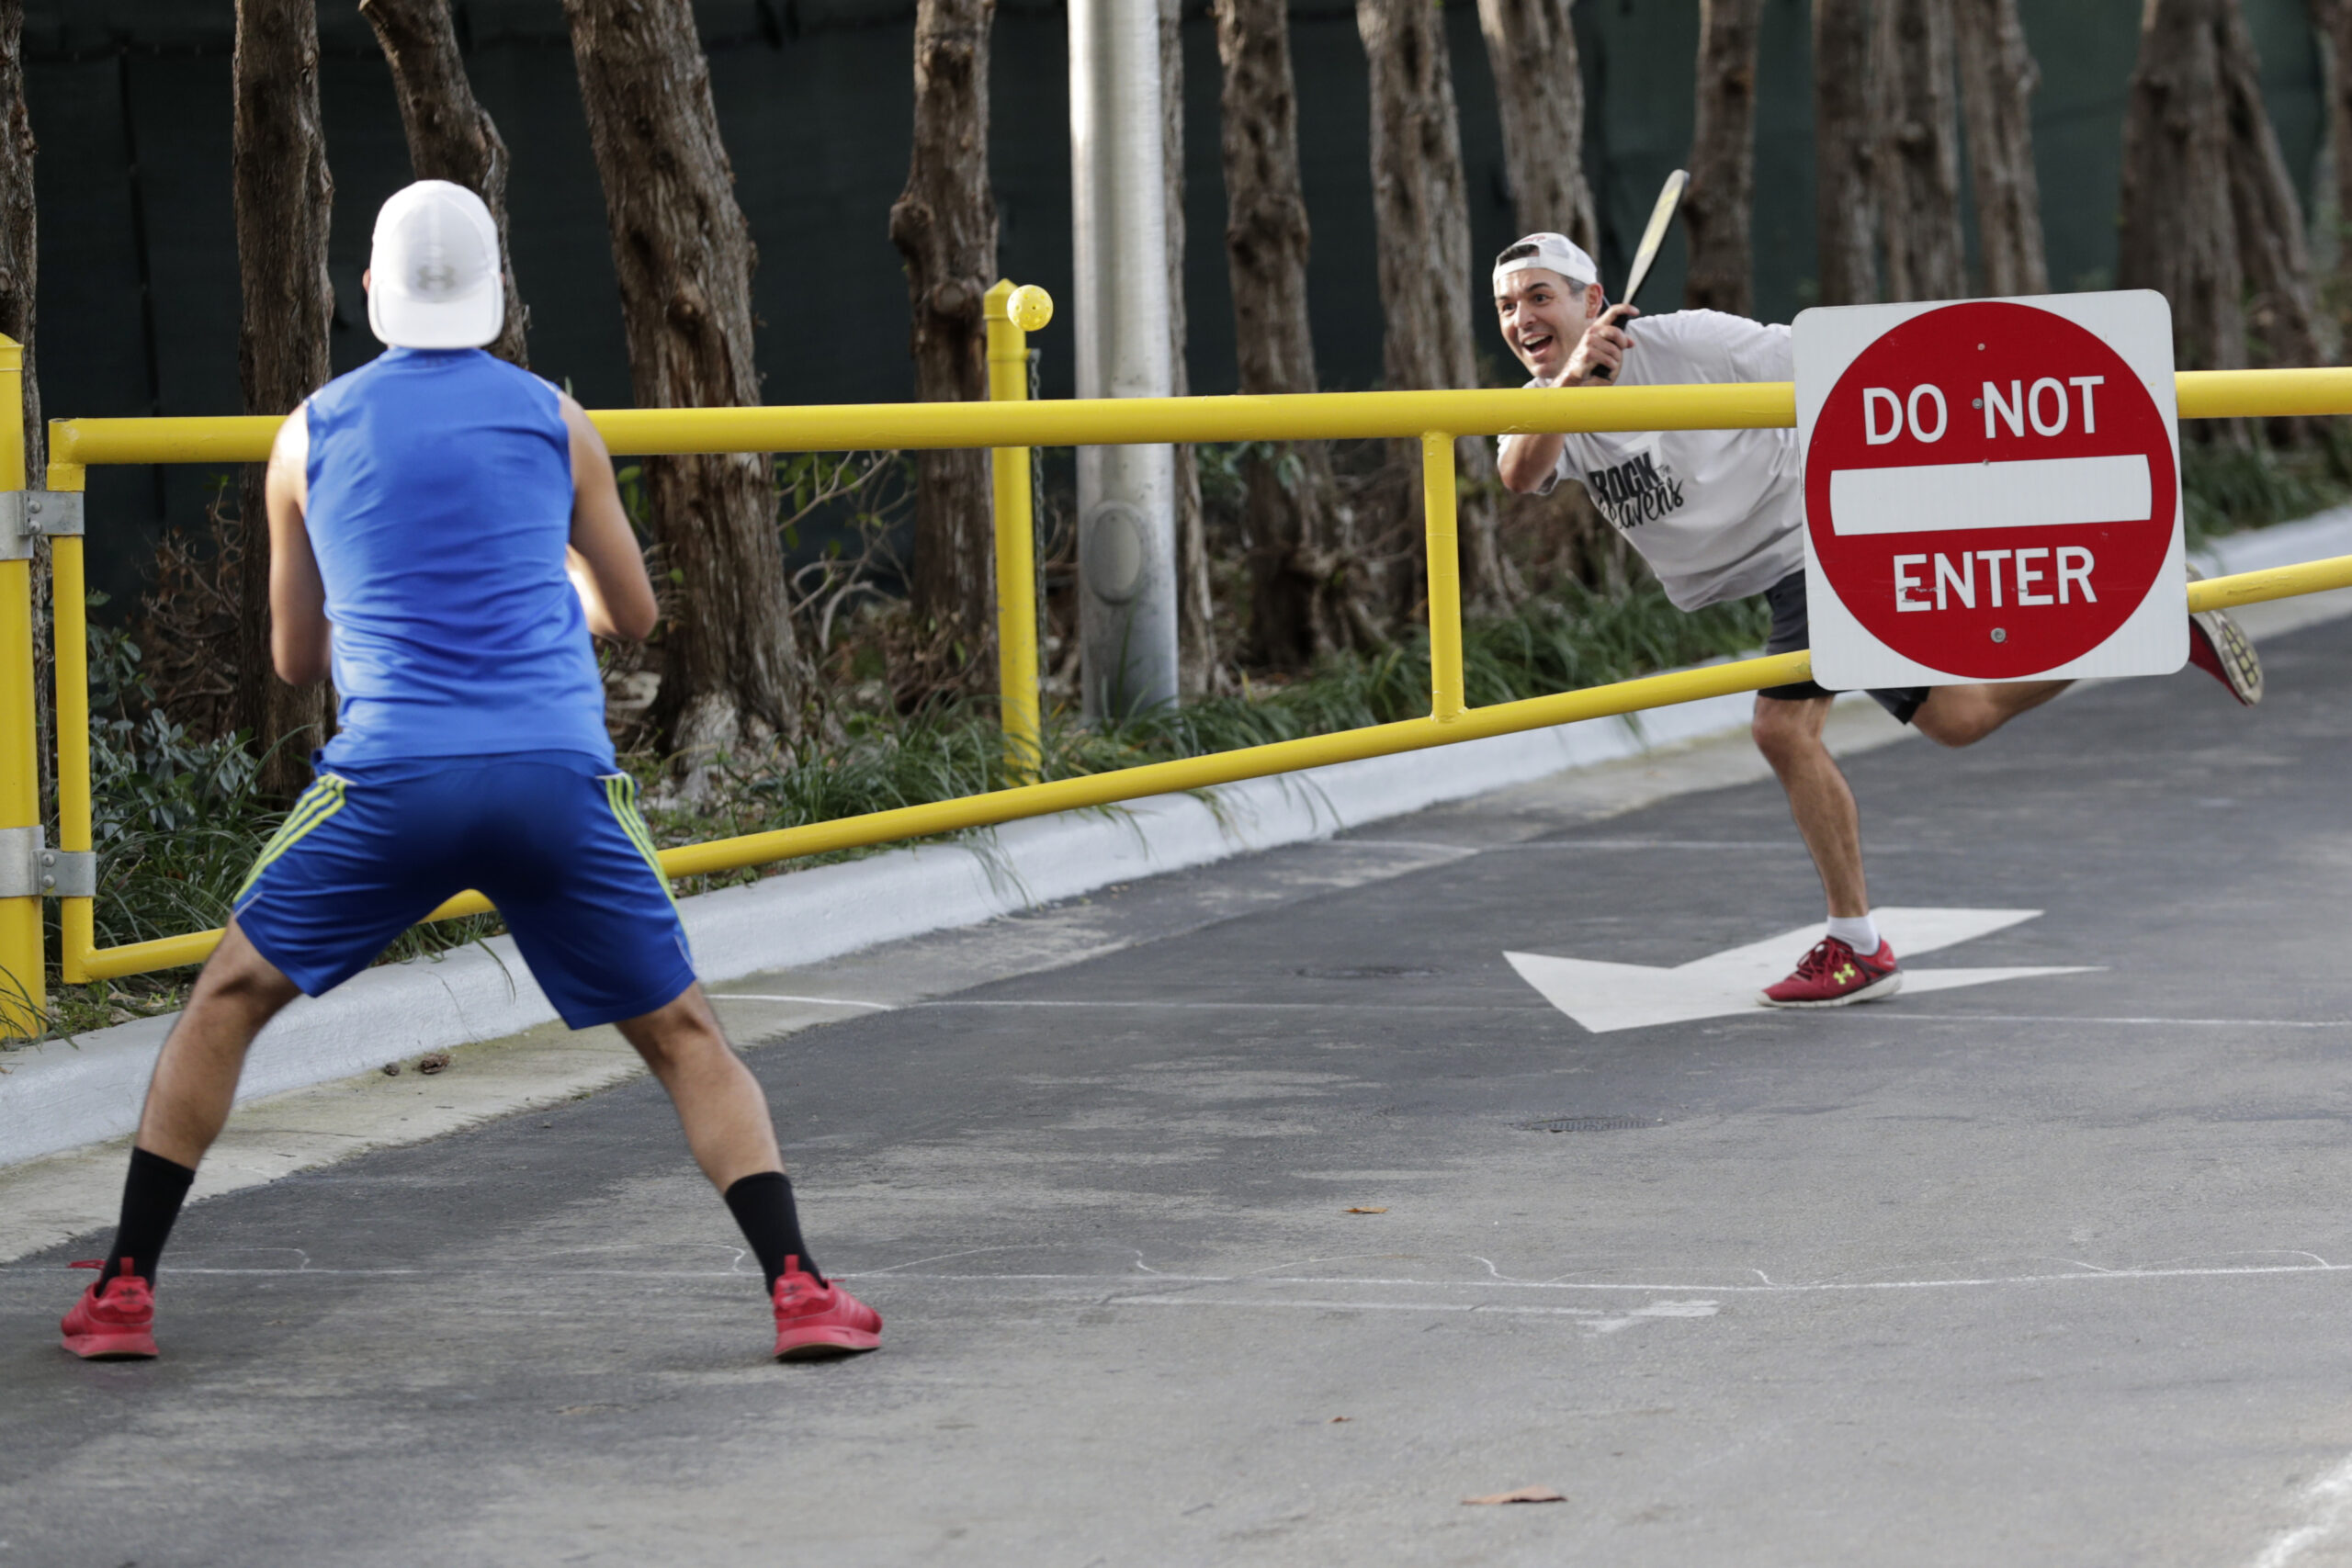 A father and son use a metal park gate as an improvised net for a pickleball game.